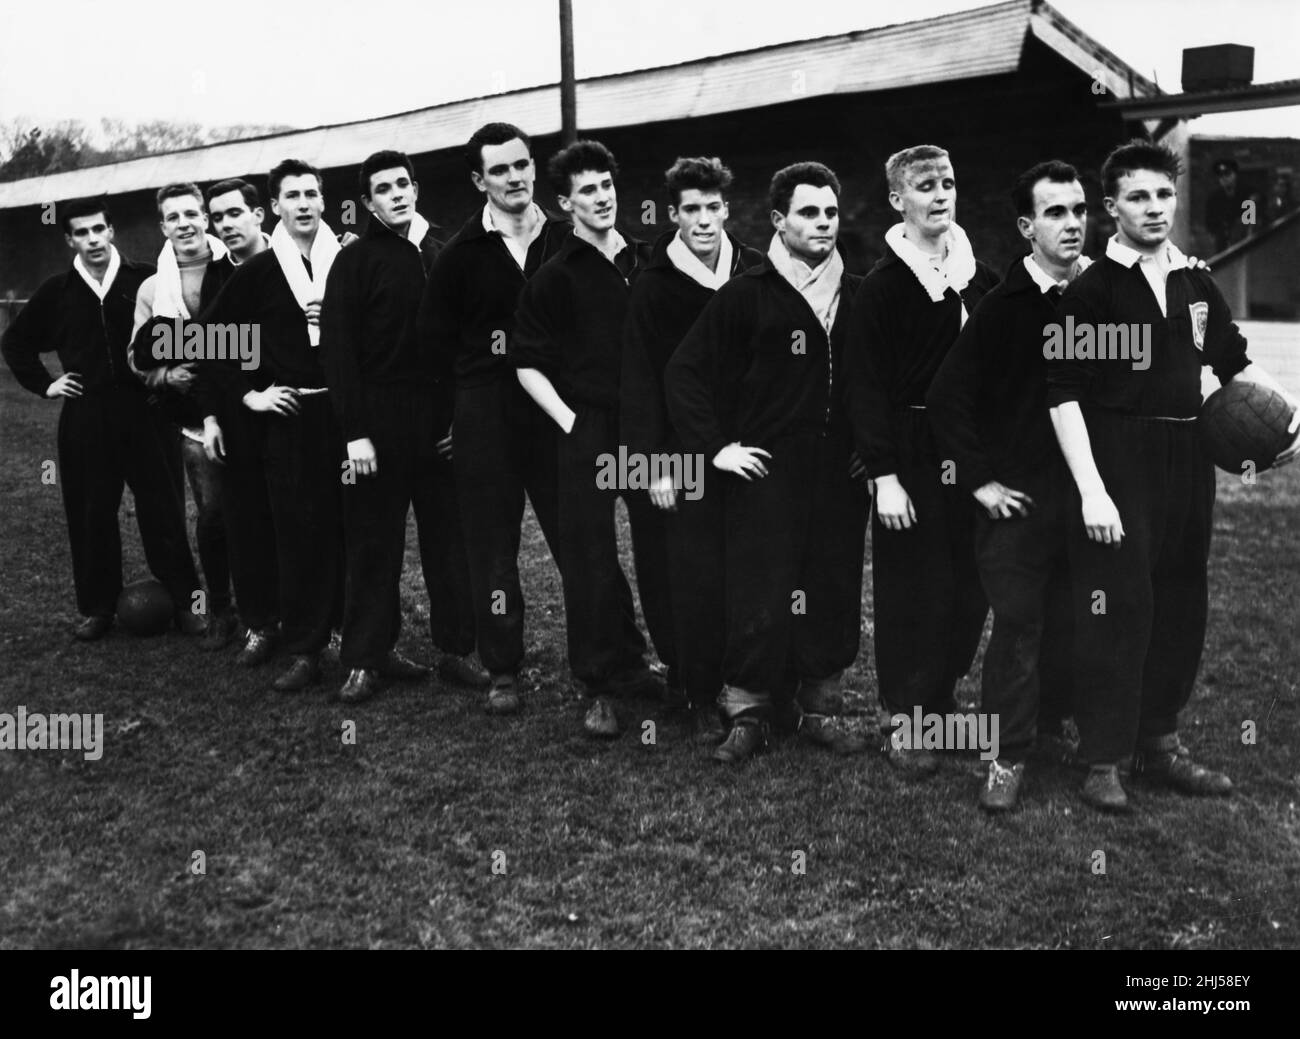 The Scottish national team take a break from training at Dunbar to line up for a photo.(From left to right) Thomson, Slater, McKay, Baird, John Baxter (Hibs), Baillie. Jim Baxter (Raith rovers), Ewen, Currie, Young, Sneddon and Wilson. 9th December 1958 Stock Photo